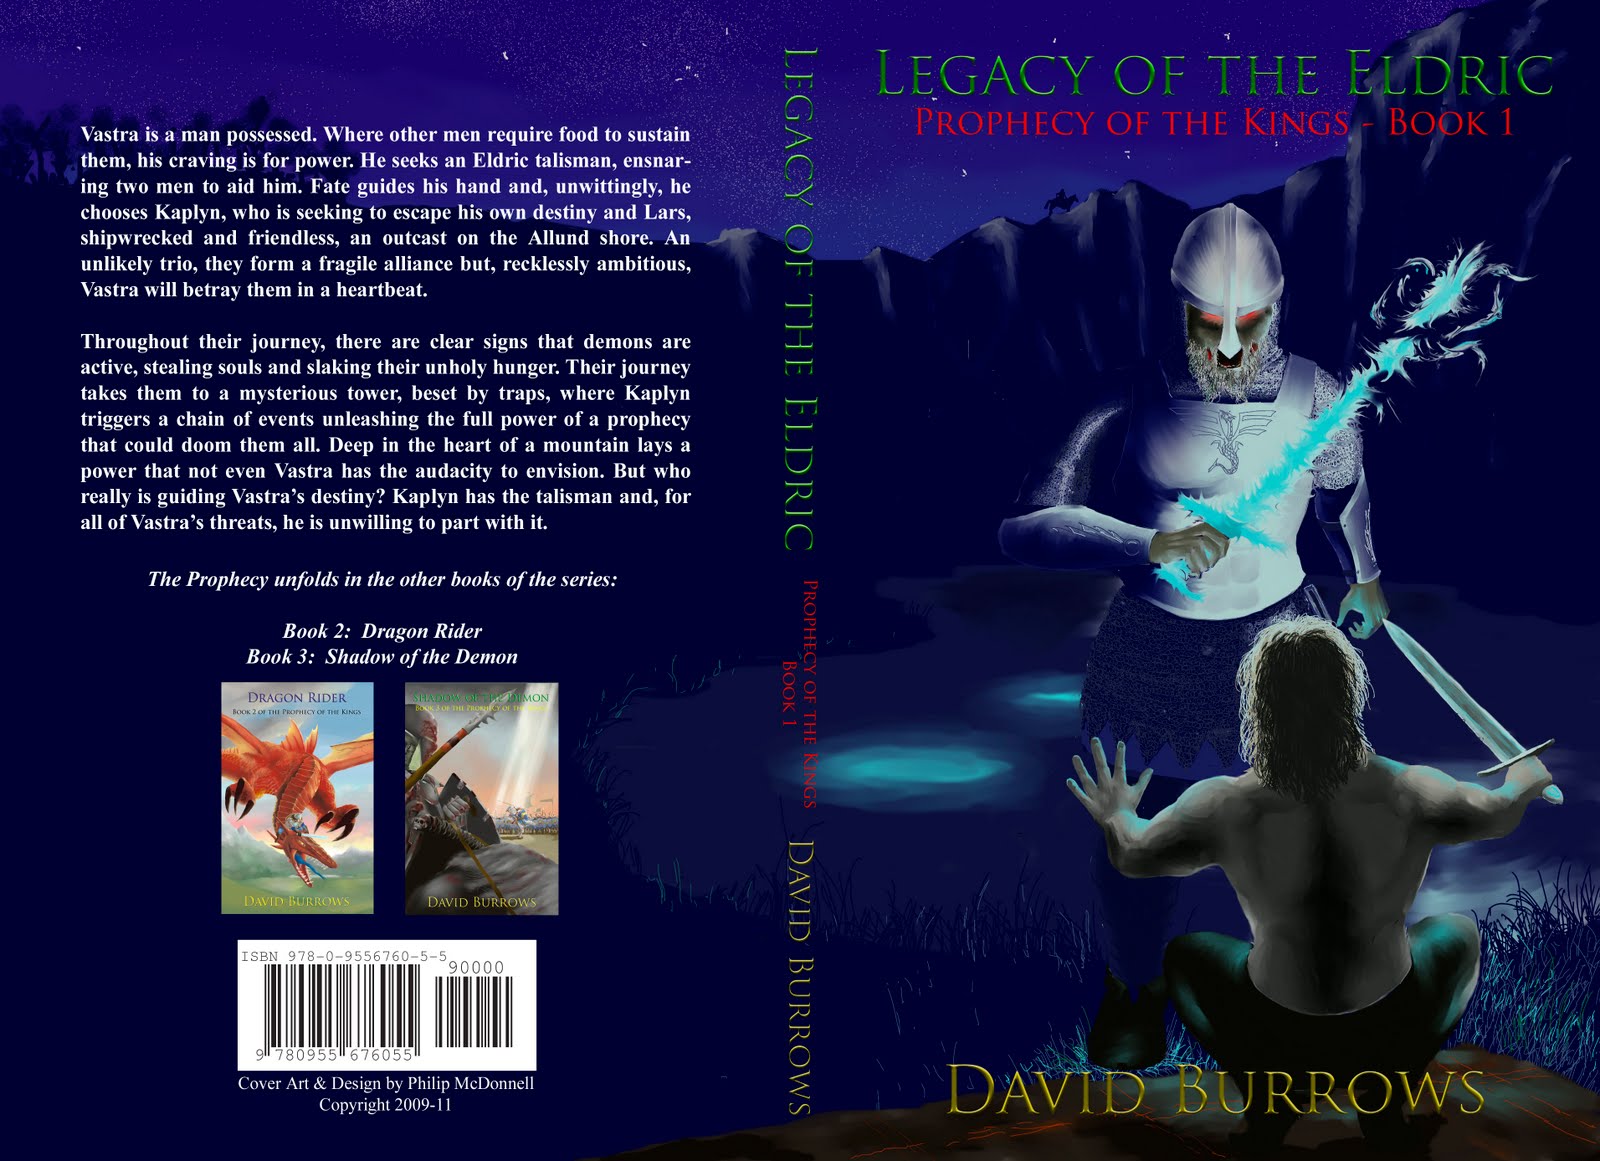 David Burrows - Fantasy Author and Tips on Writing a Book.: March 2011